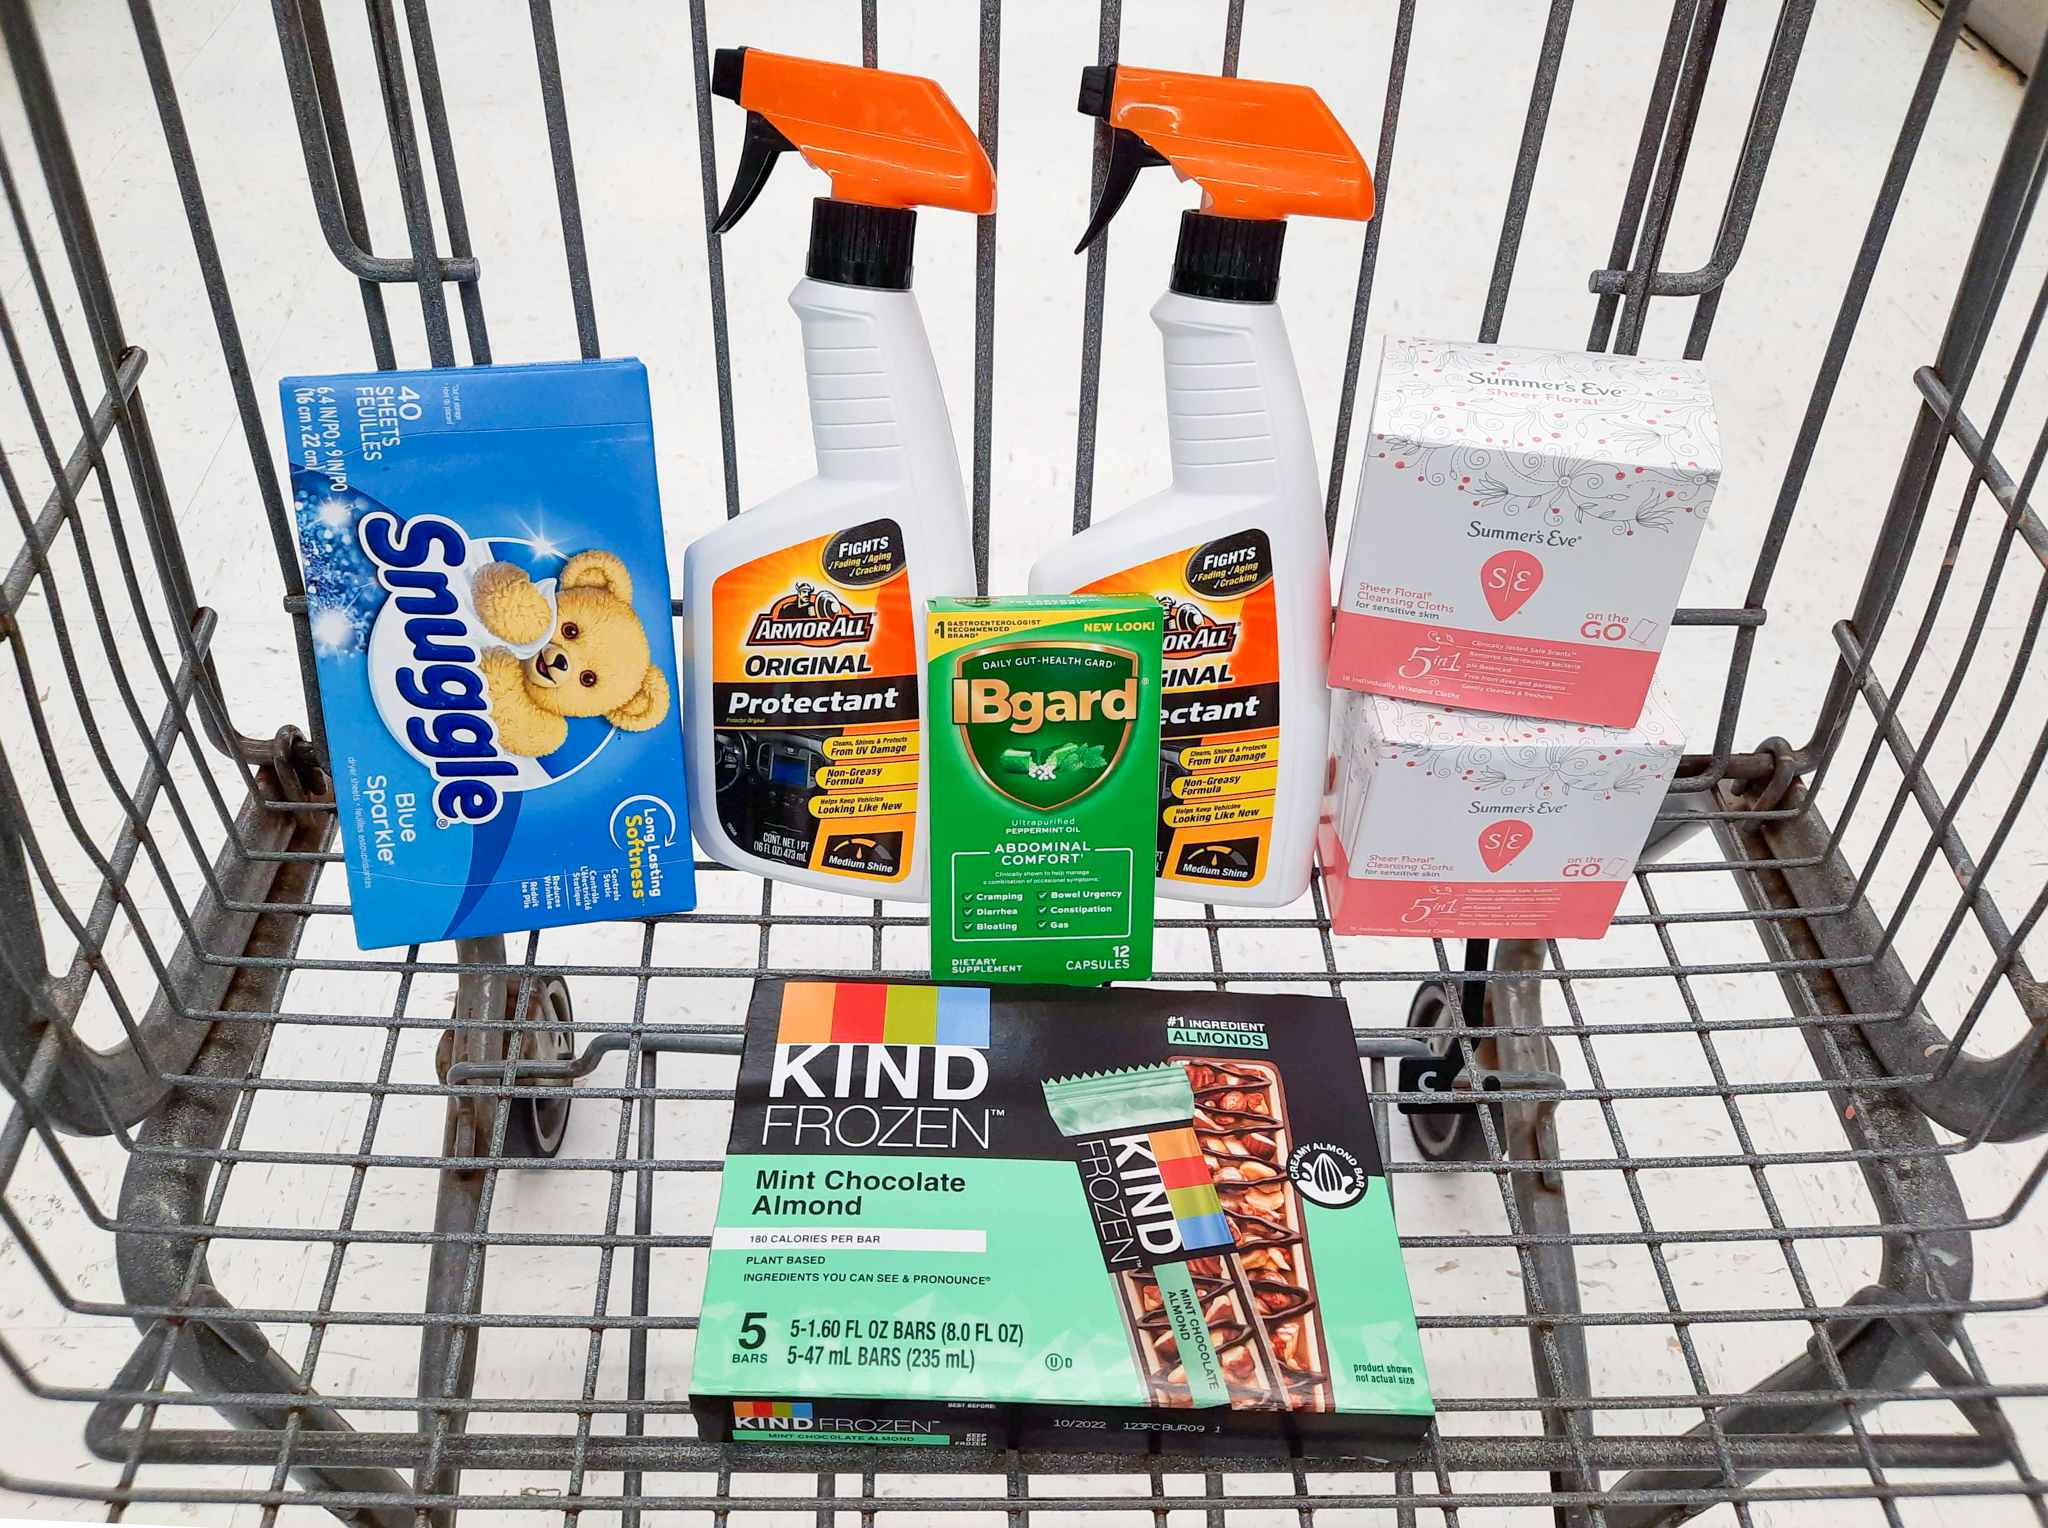 Armor All, Summer's Eve, Ibgurd, Snuggle, and Kind products in Walmart shopping cart